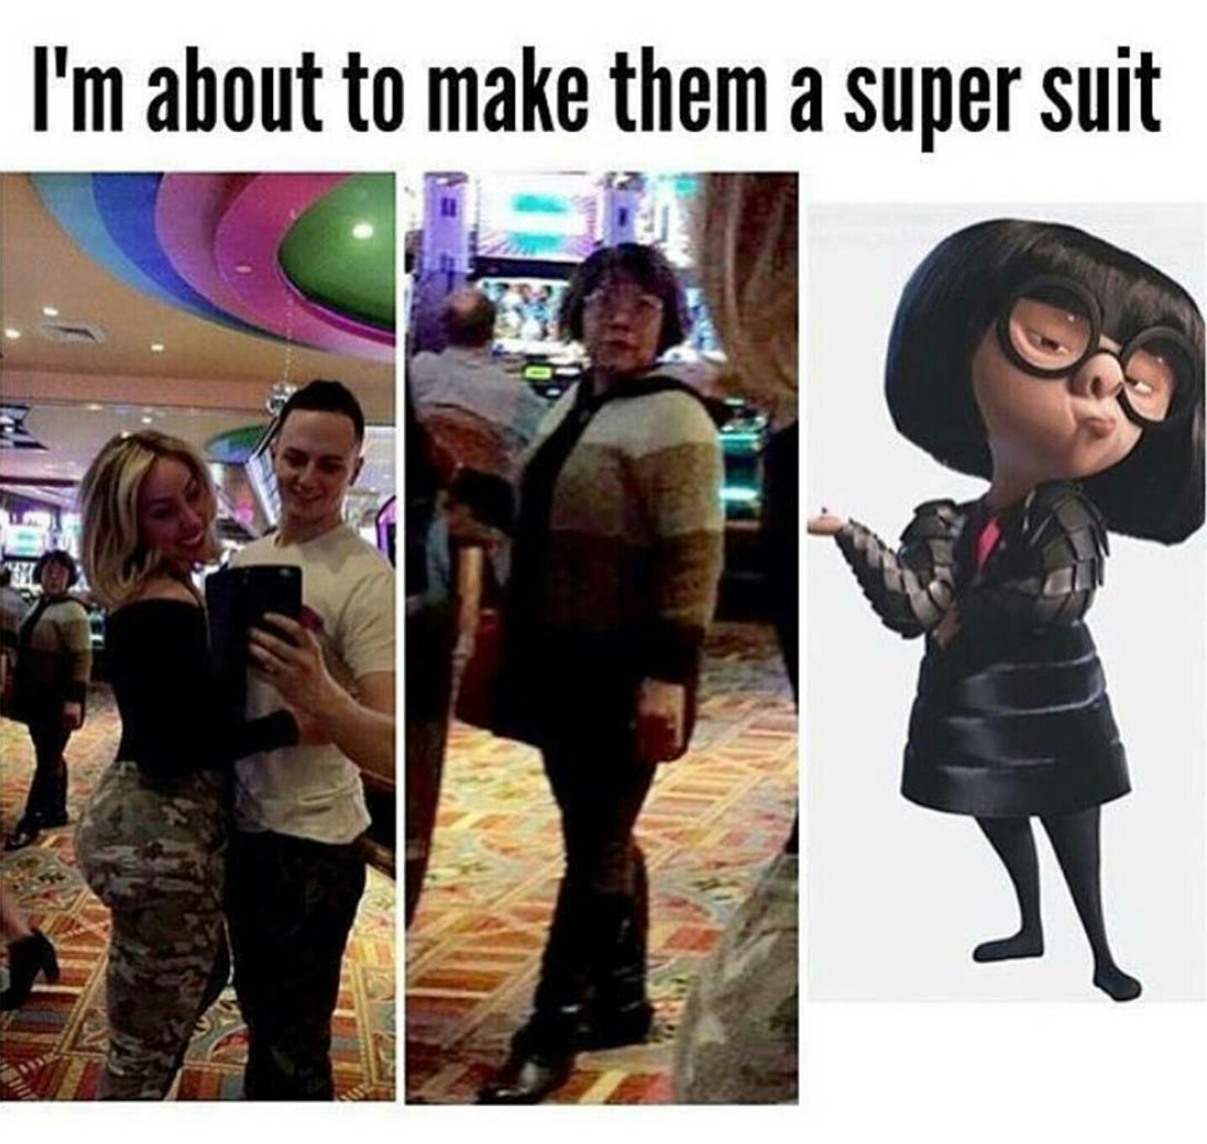 Hyped for incredibles 2 - Meme by XghettoXblaster :) Memedroid